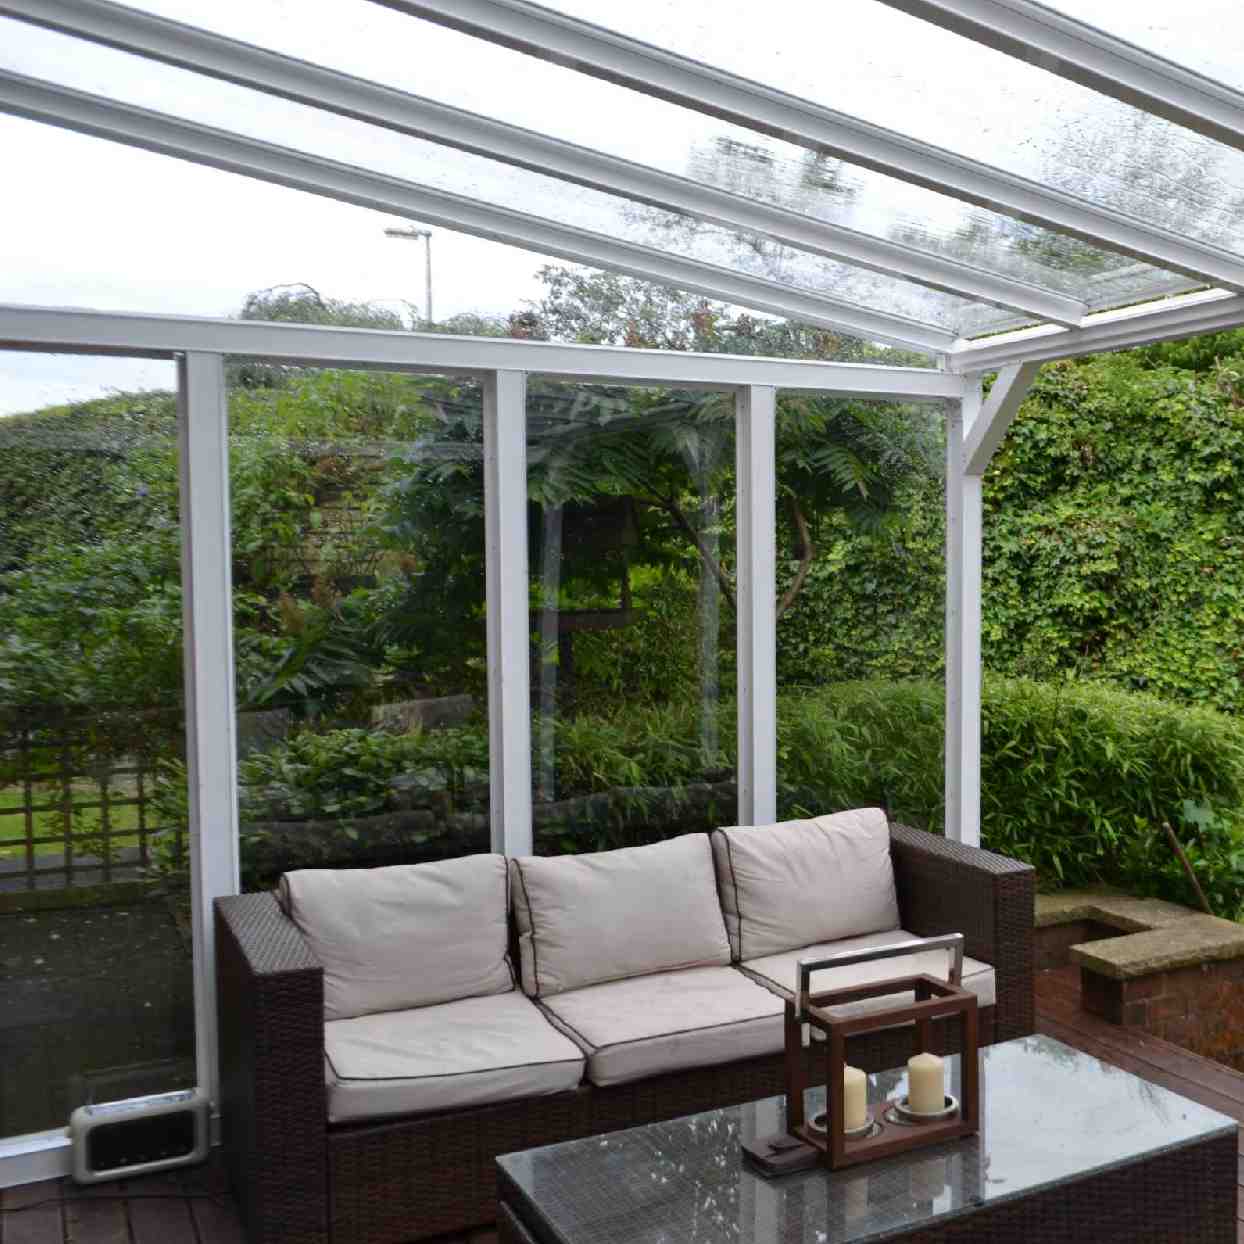 Buy Omega Verandah White with 16mm Polycarbonate Glazing - 5.2m (W) x 1.5m (P), (3) Supporting Posts online today